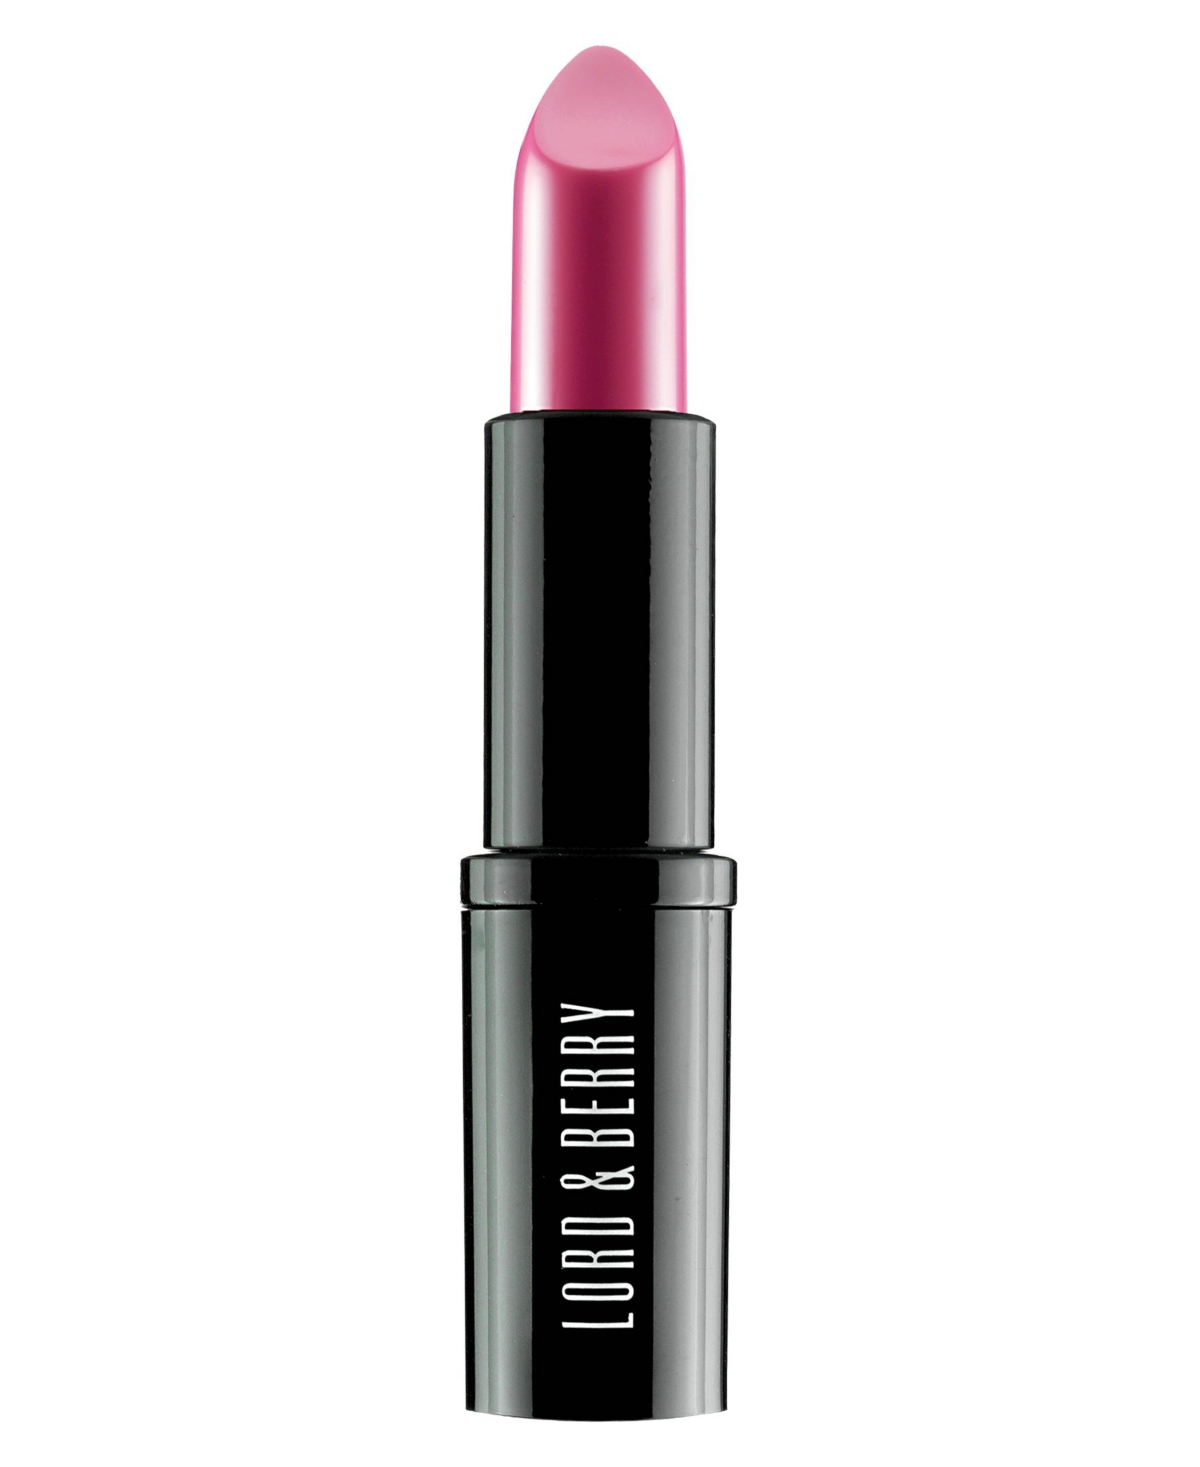 Lord & Berry Vogue Matte Lipstick In 's Pink - Vibrant Blue Pink